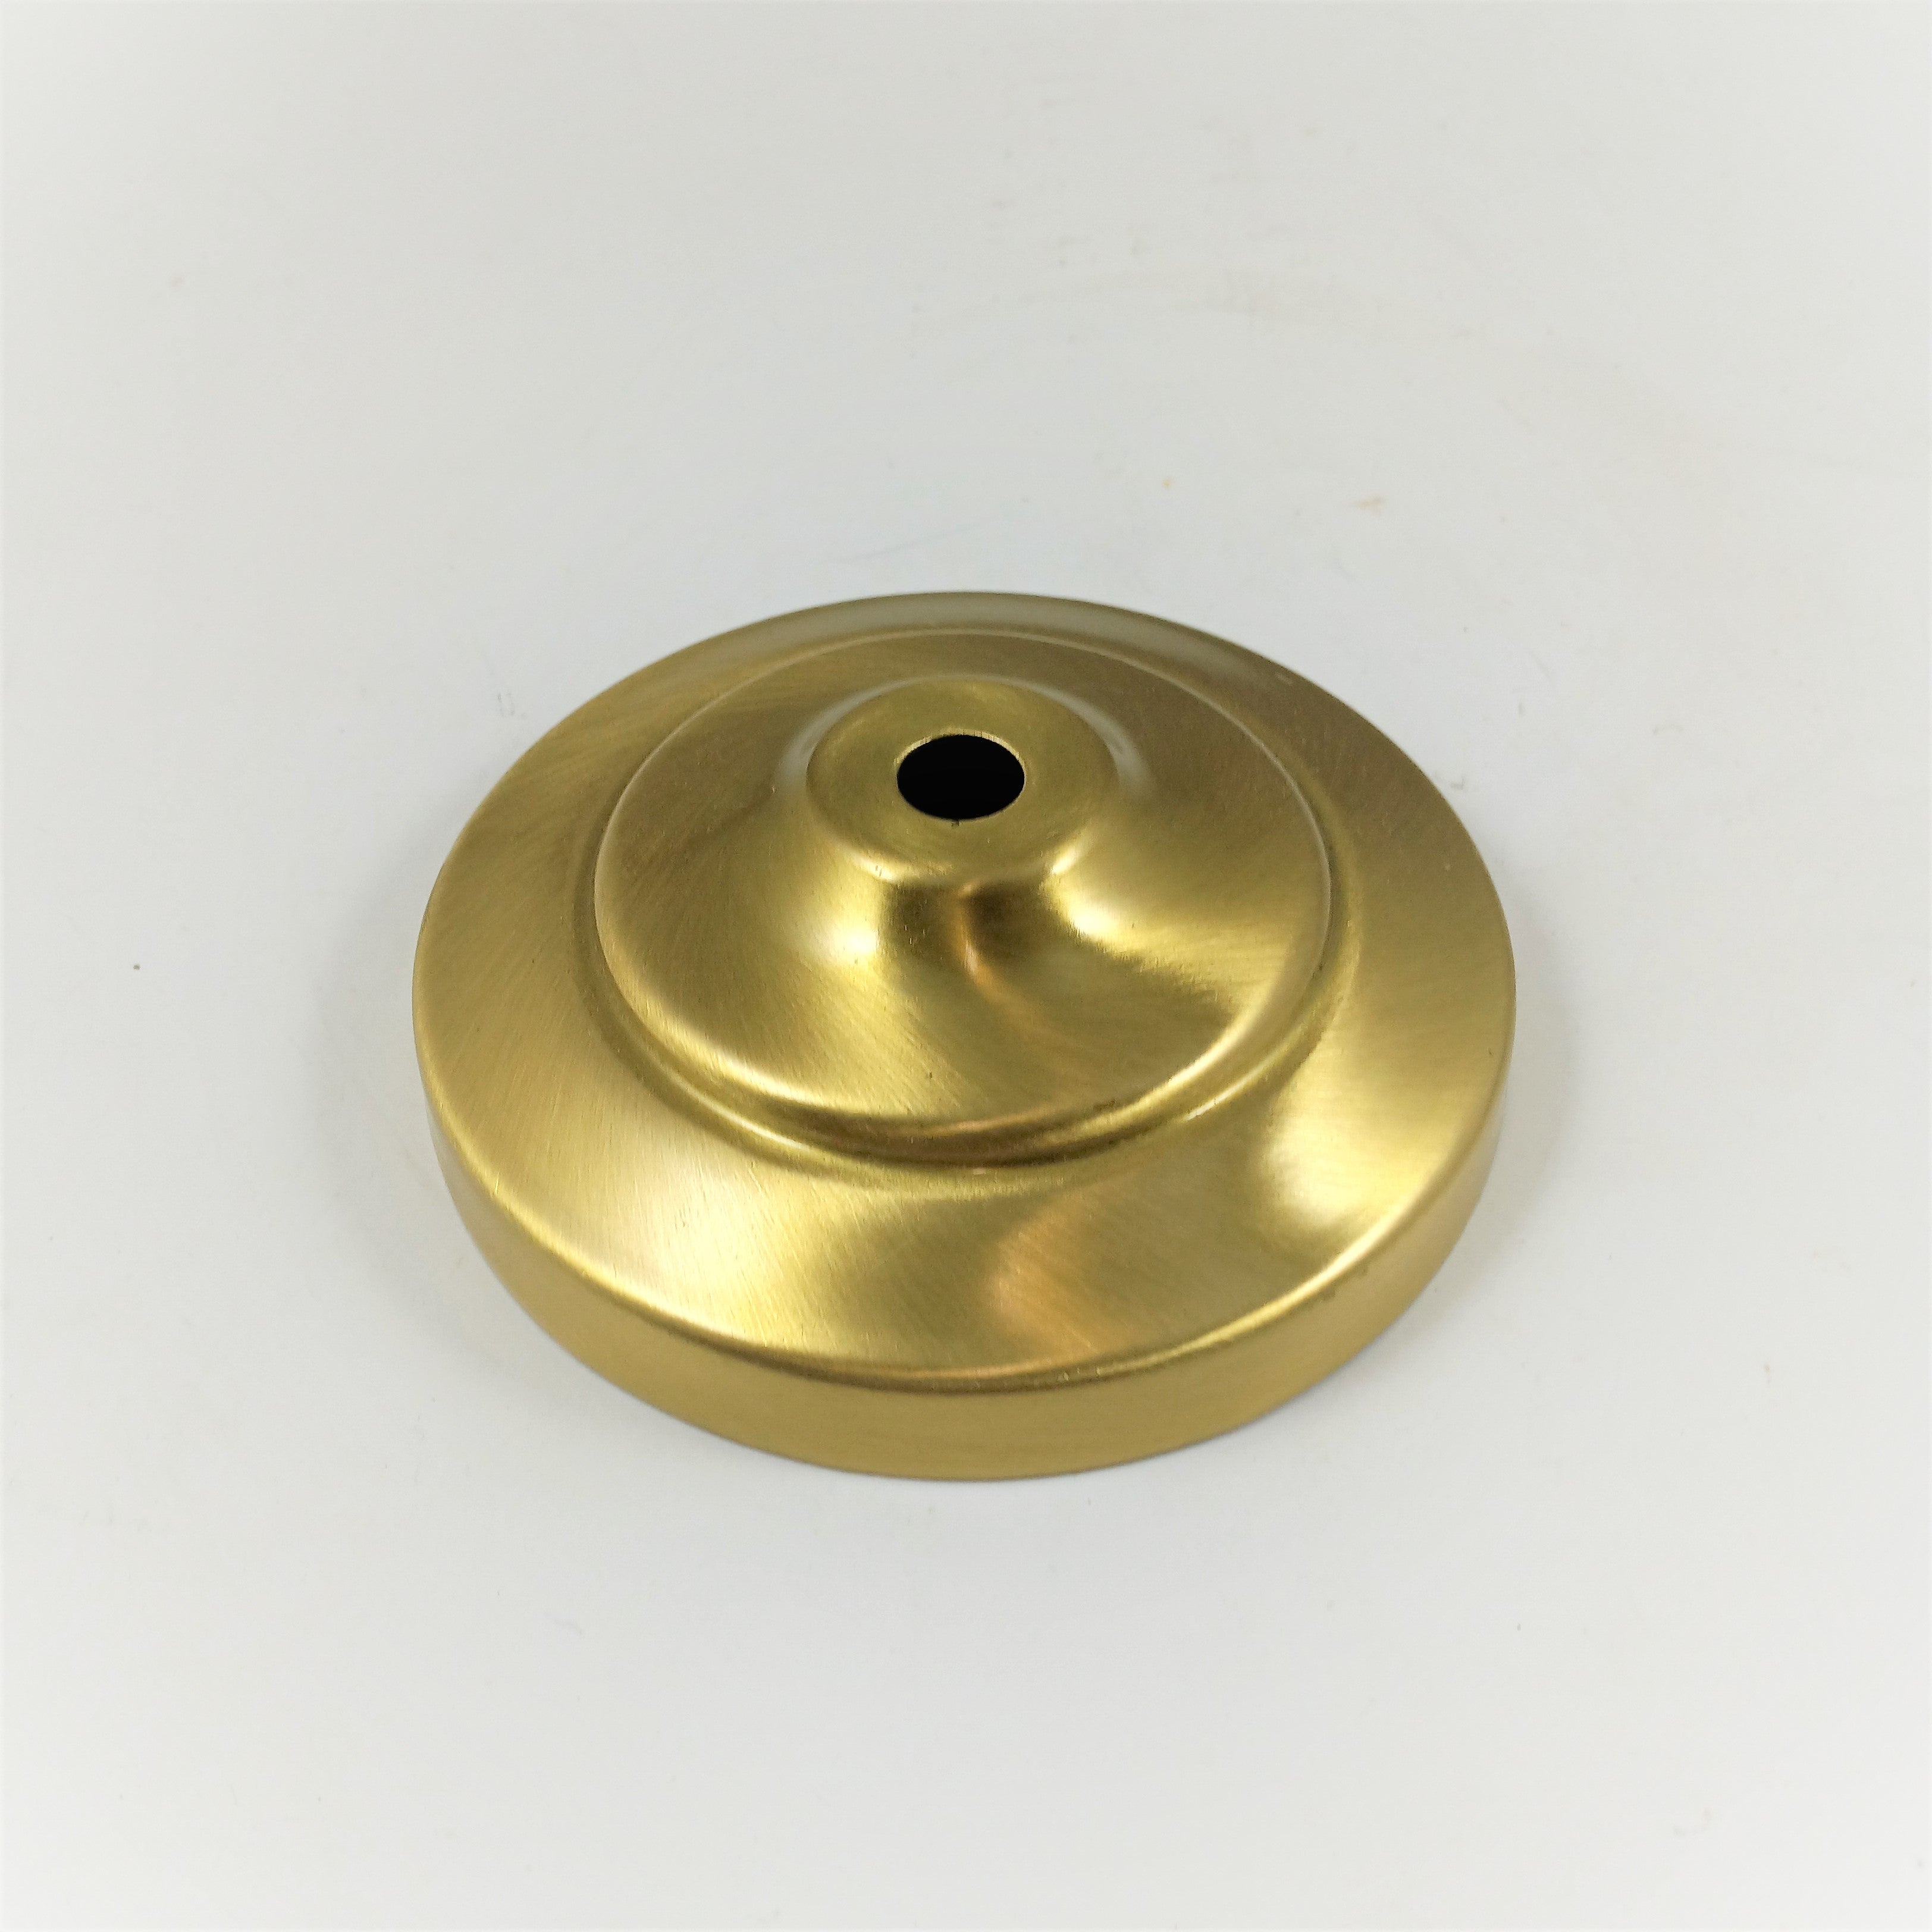 4" Brushed & Lacquered Deep Brass Cap with 1/2" Edge